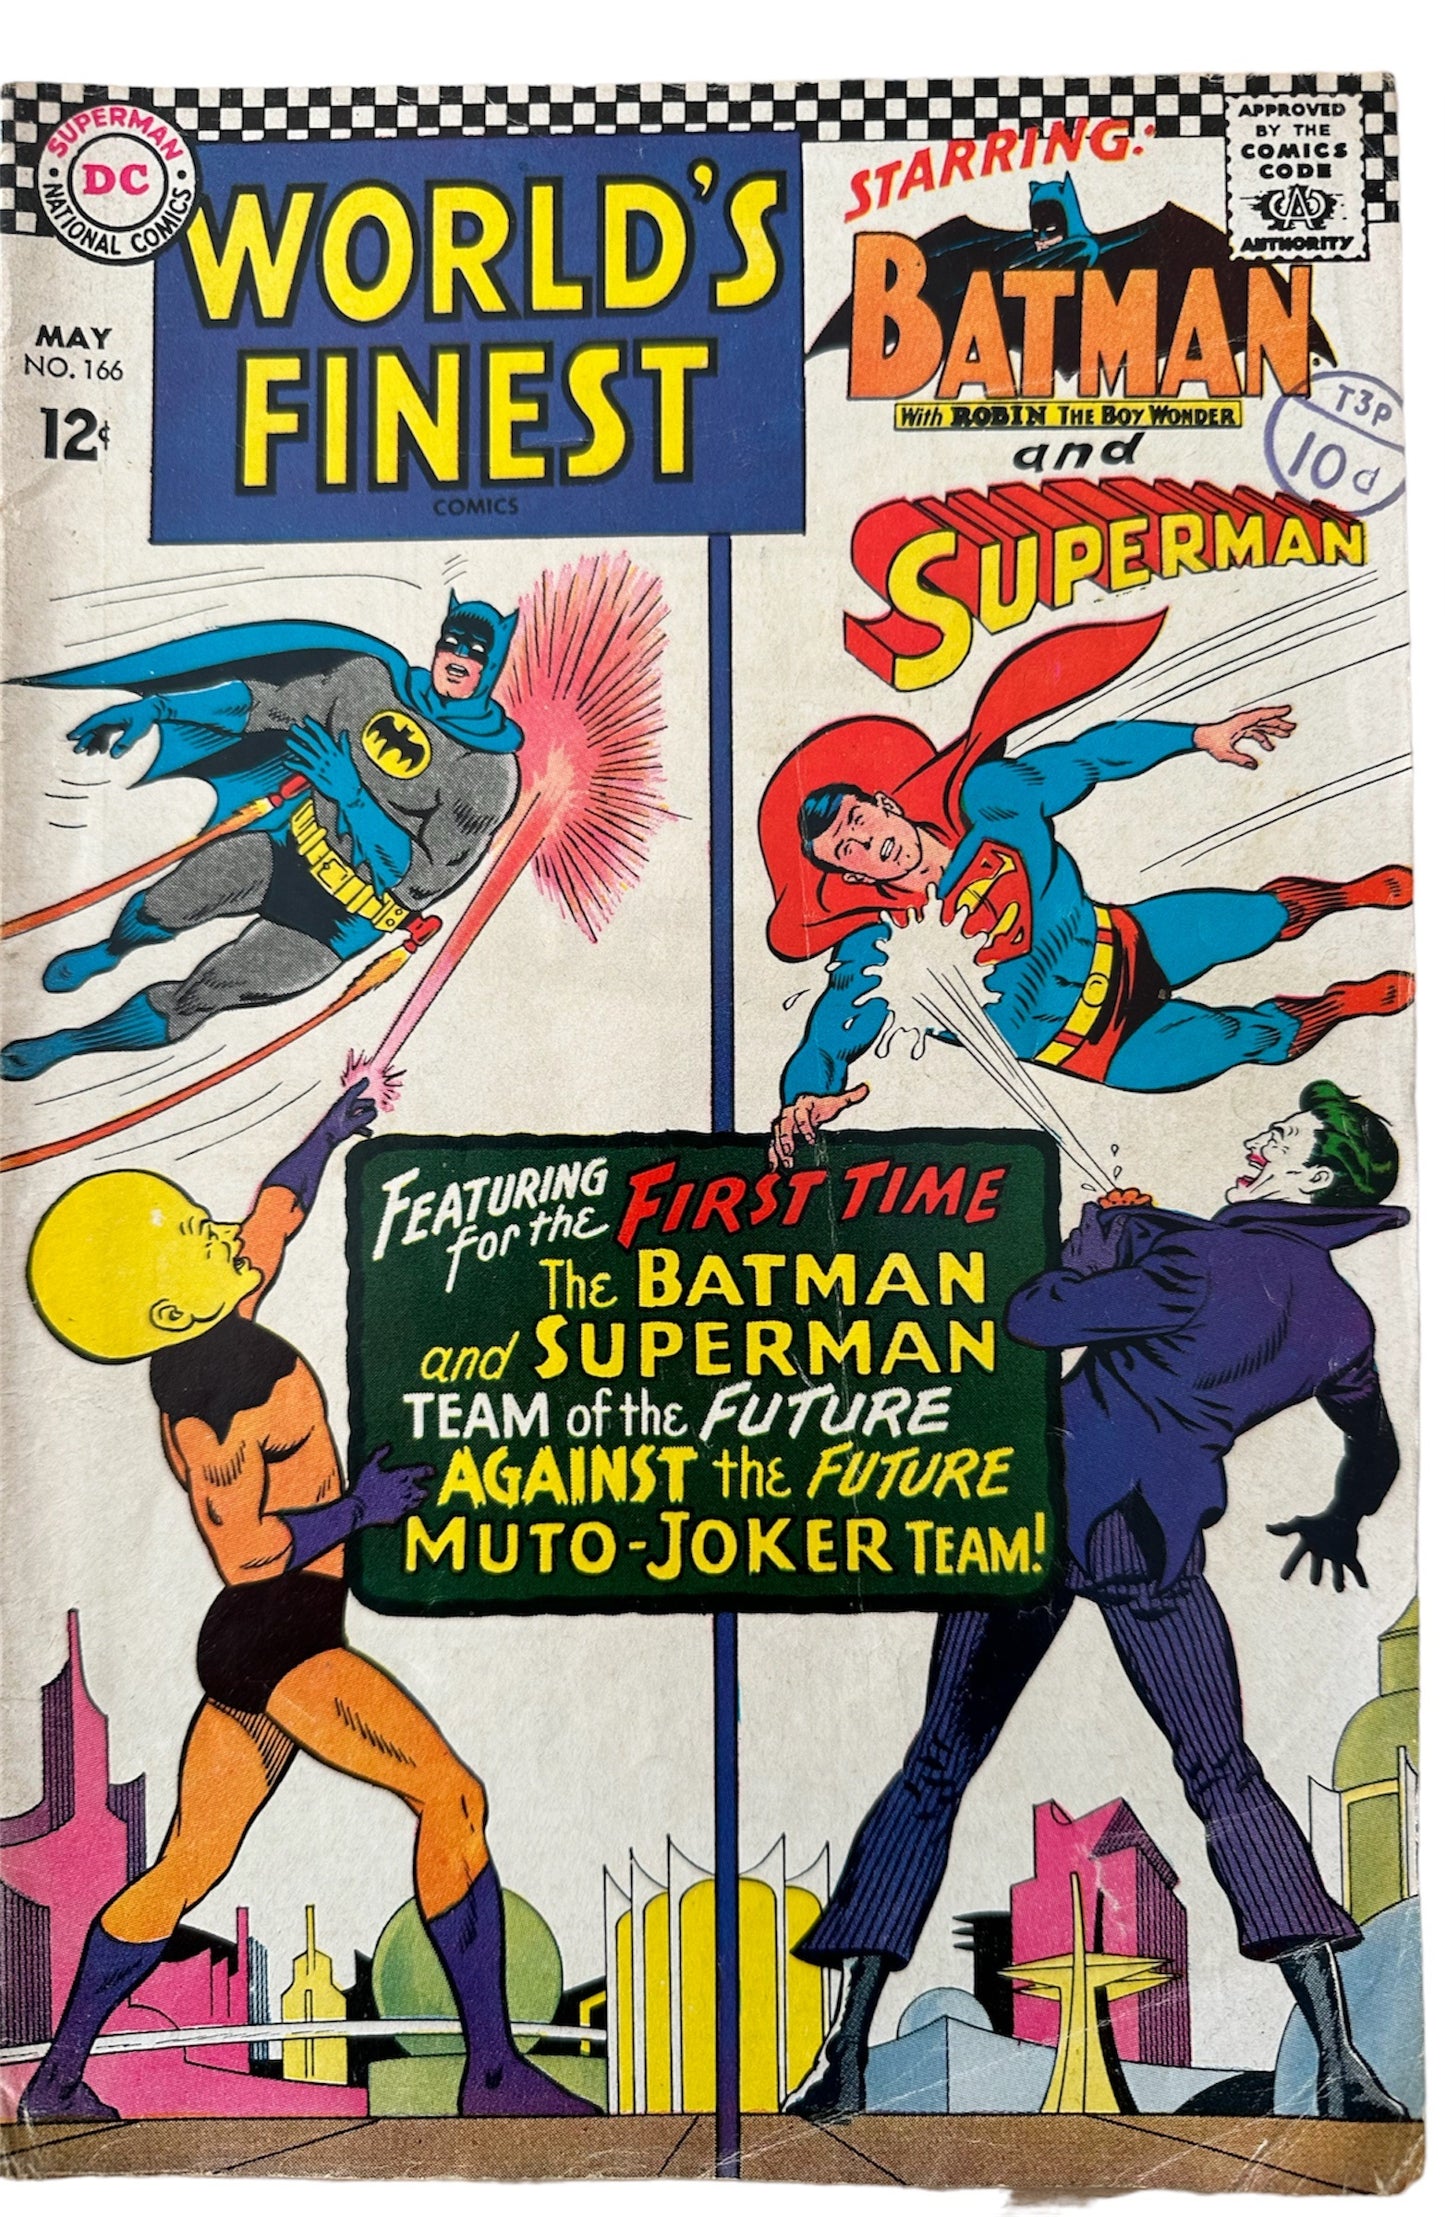 Vintage 1967 DC Worlds Finest Comics Issue Number 166 Starring Superman And Batman With Robin The Boy Wonder - Very Good Condition Vintage Comic